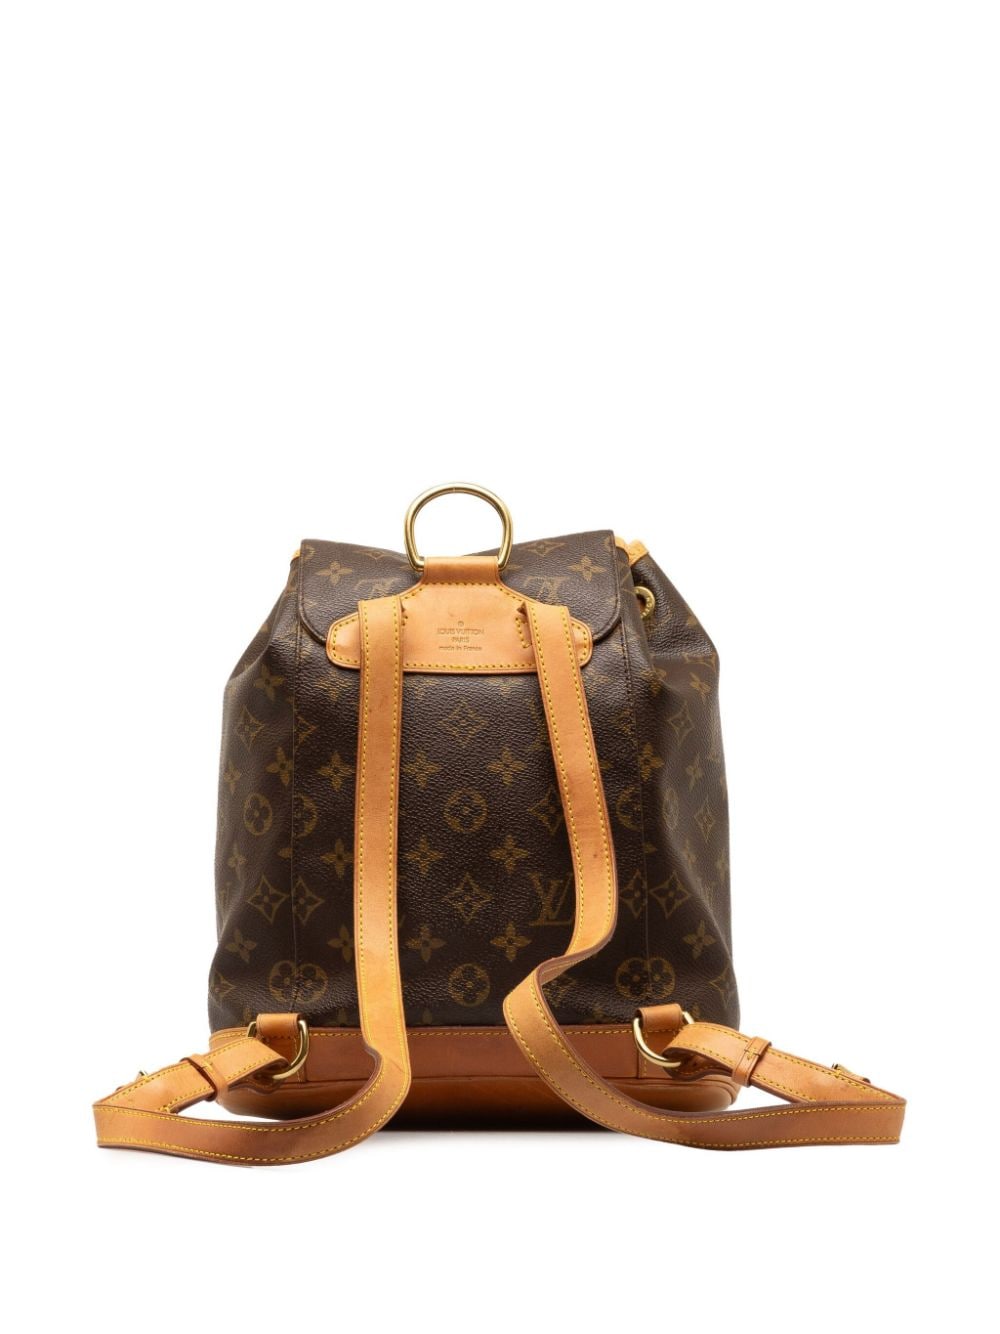 Louis Vuitton Pre-Owned 2001 Montsouris MM backpack - Bruin